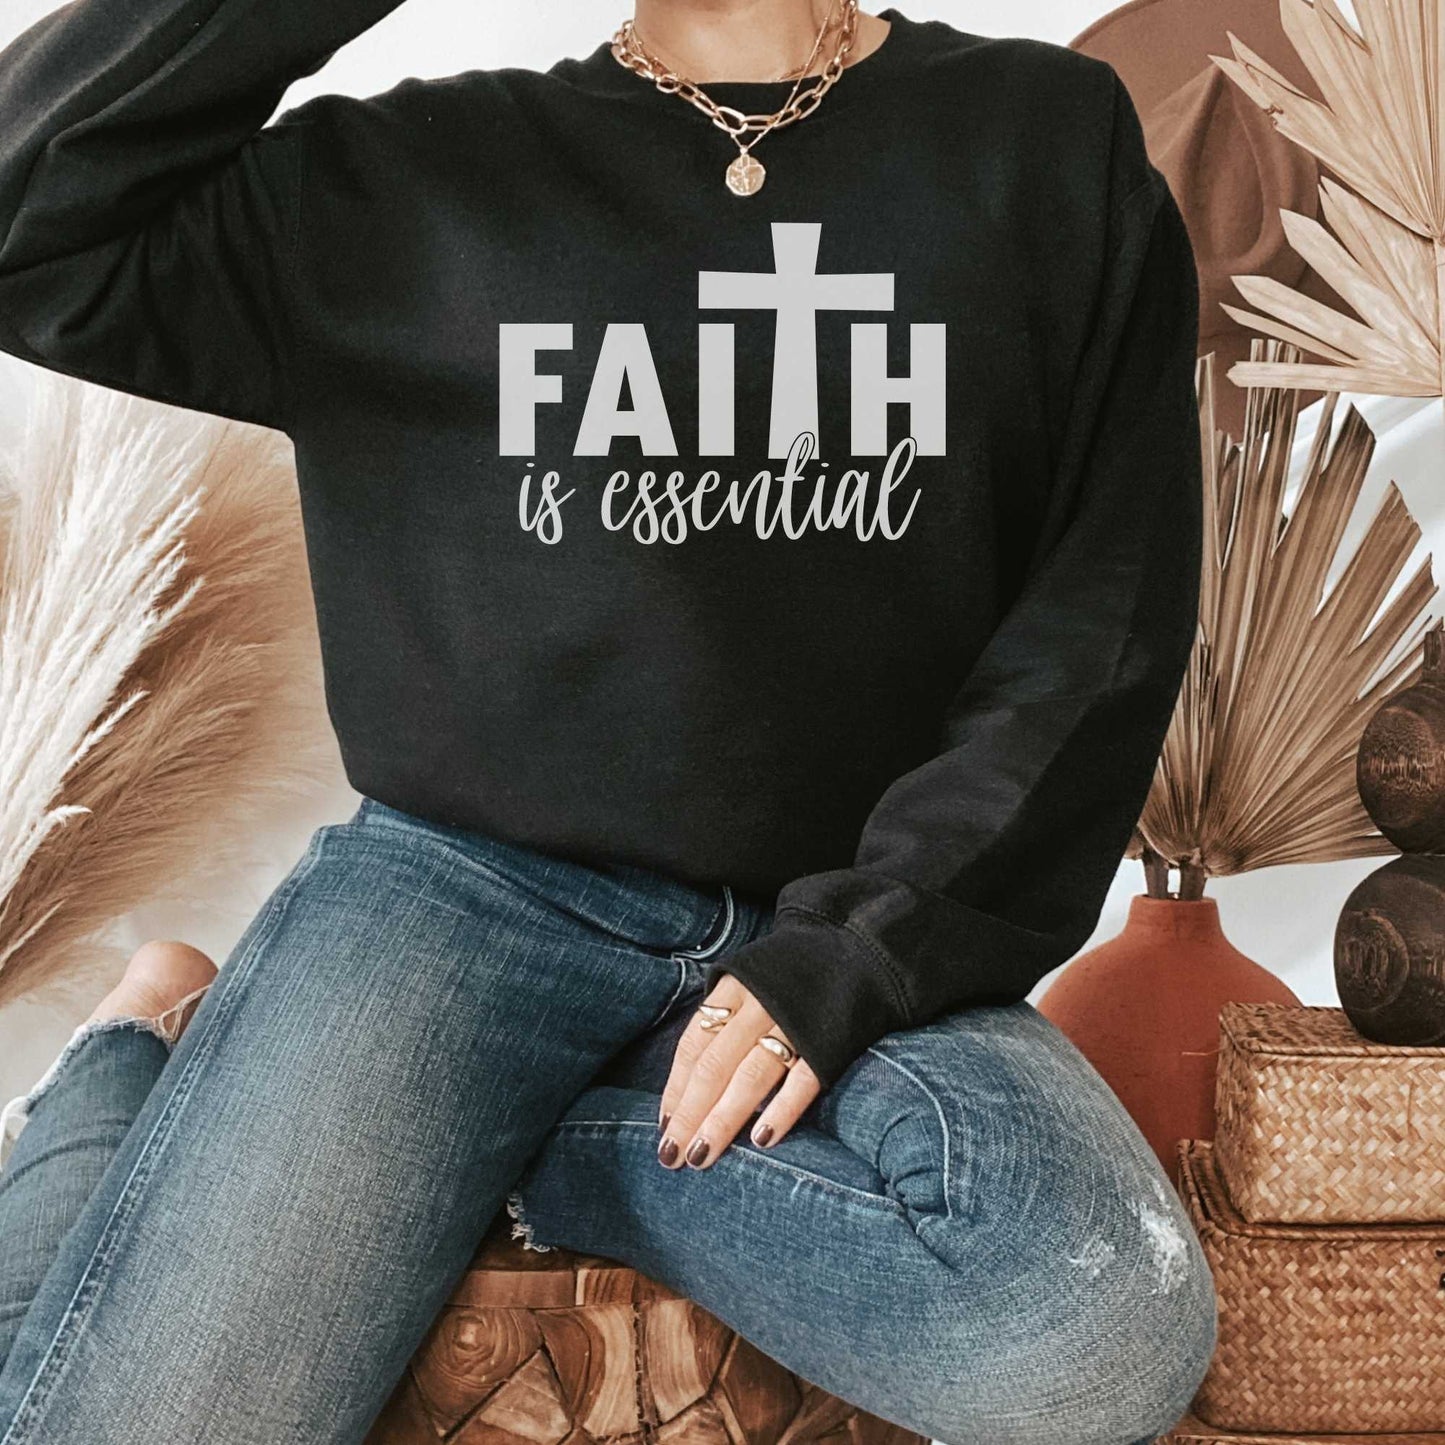 Faith is Essential Shirts about God for Women and Men